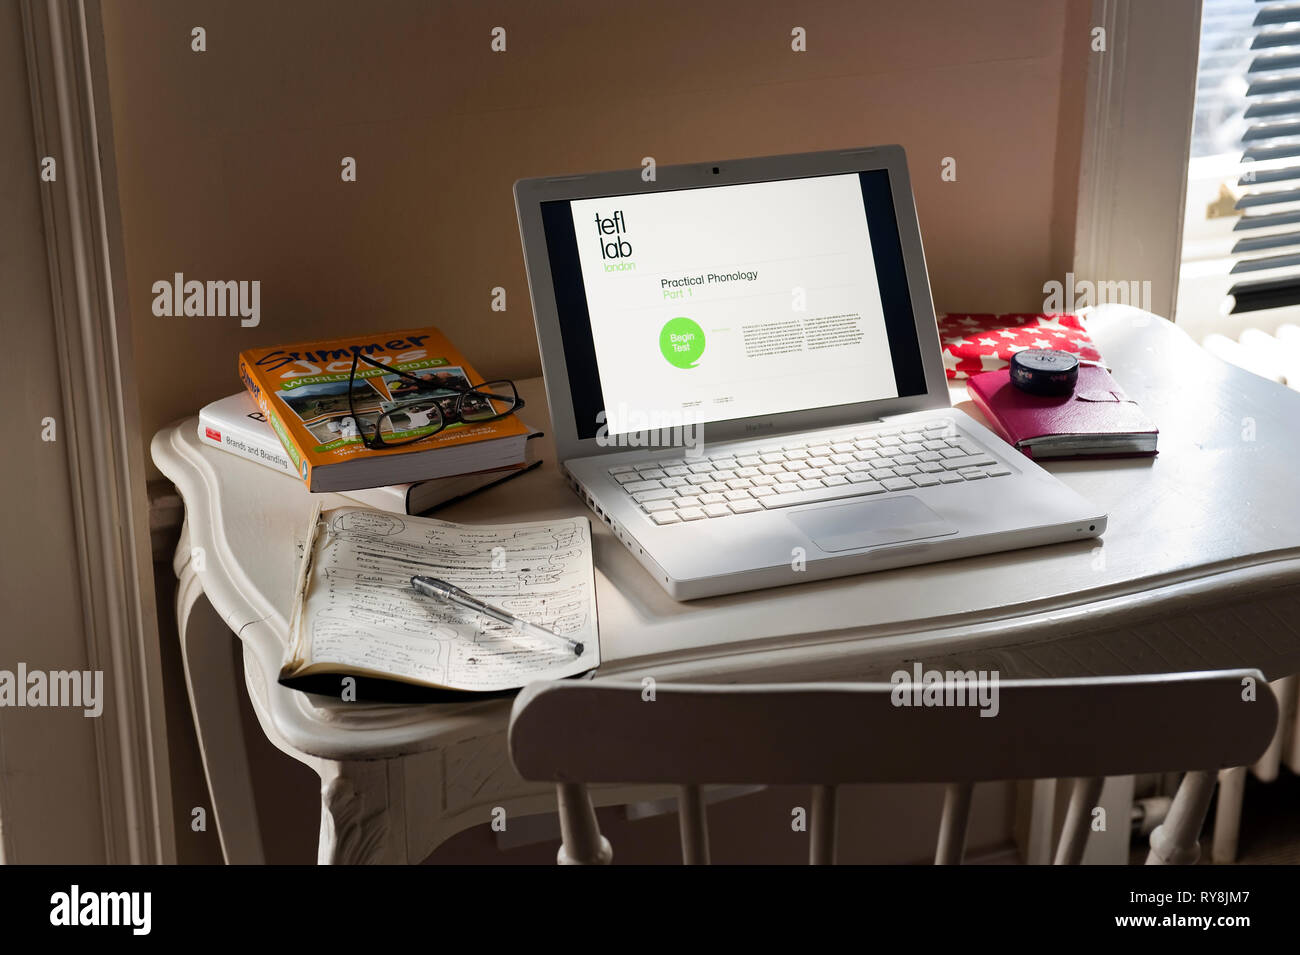 'Laptop on desk at TEFL Lab in London, England' Stock Photo